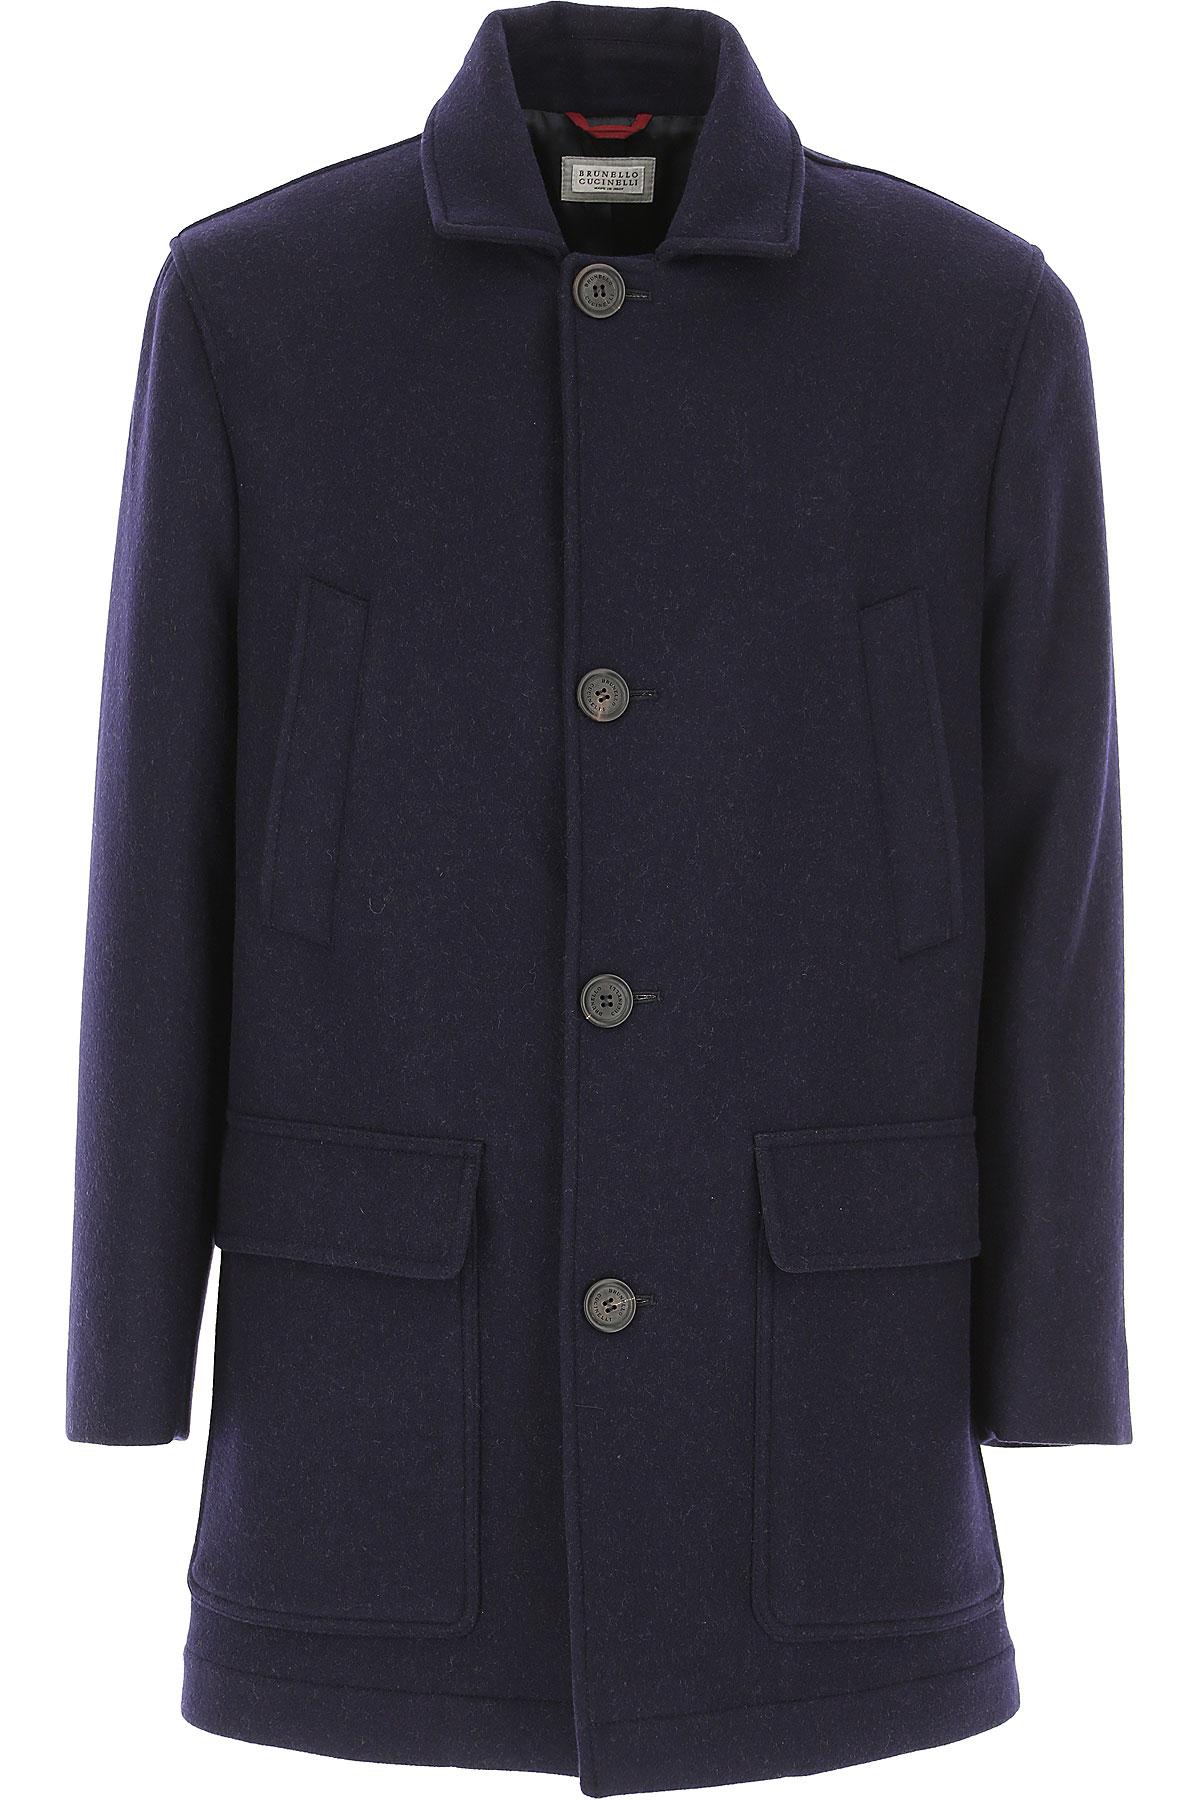 Brunello Cucinelli Wool Single-breasted Textured Coat in Navy (Blue ...